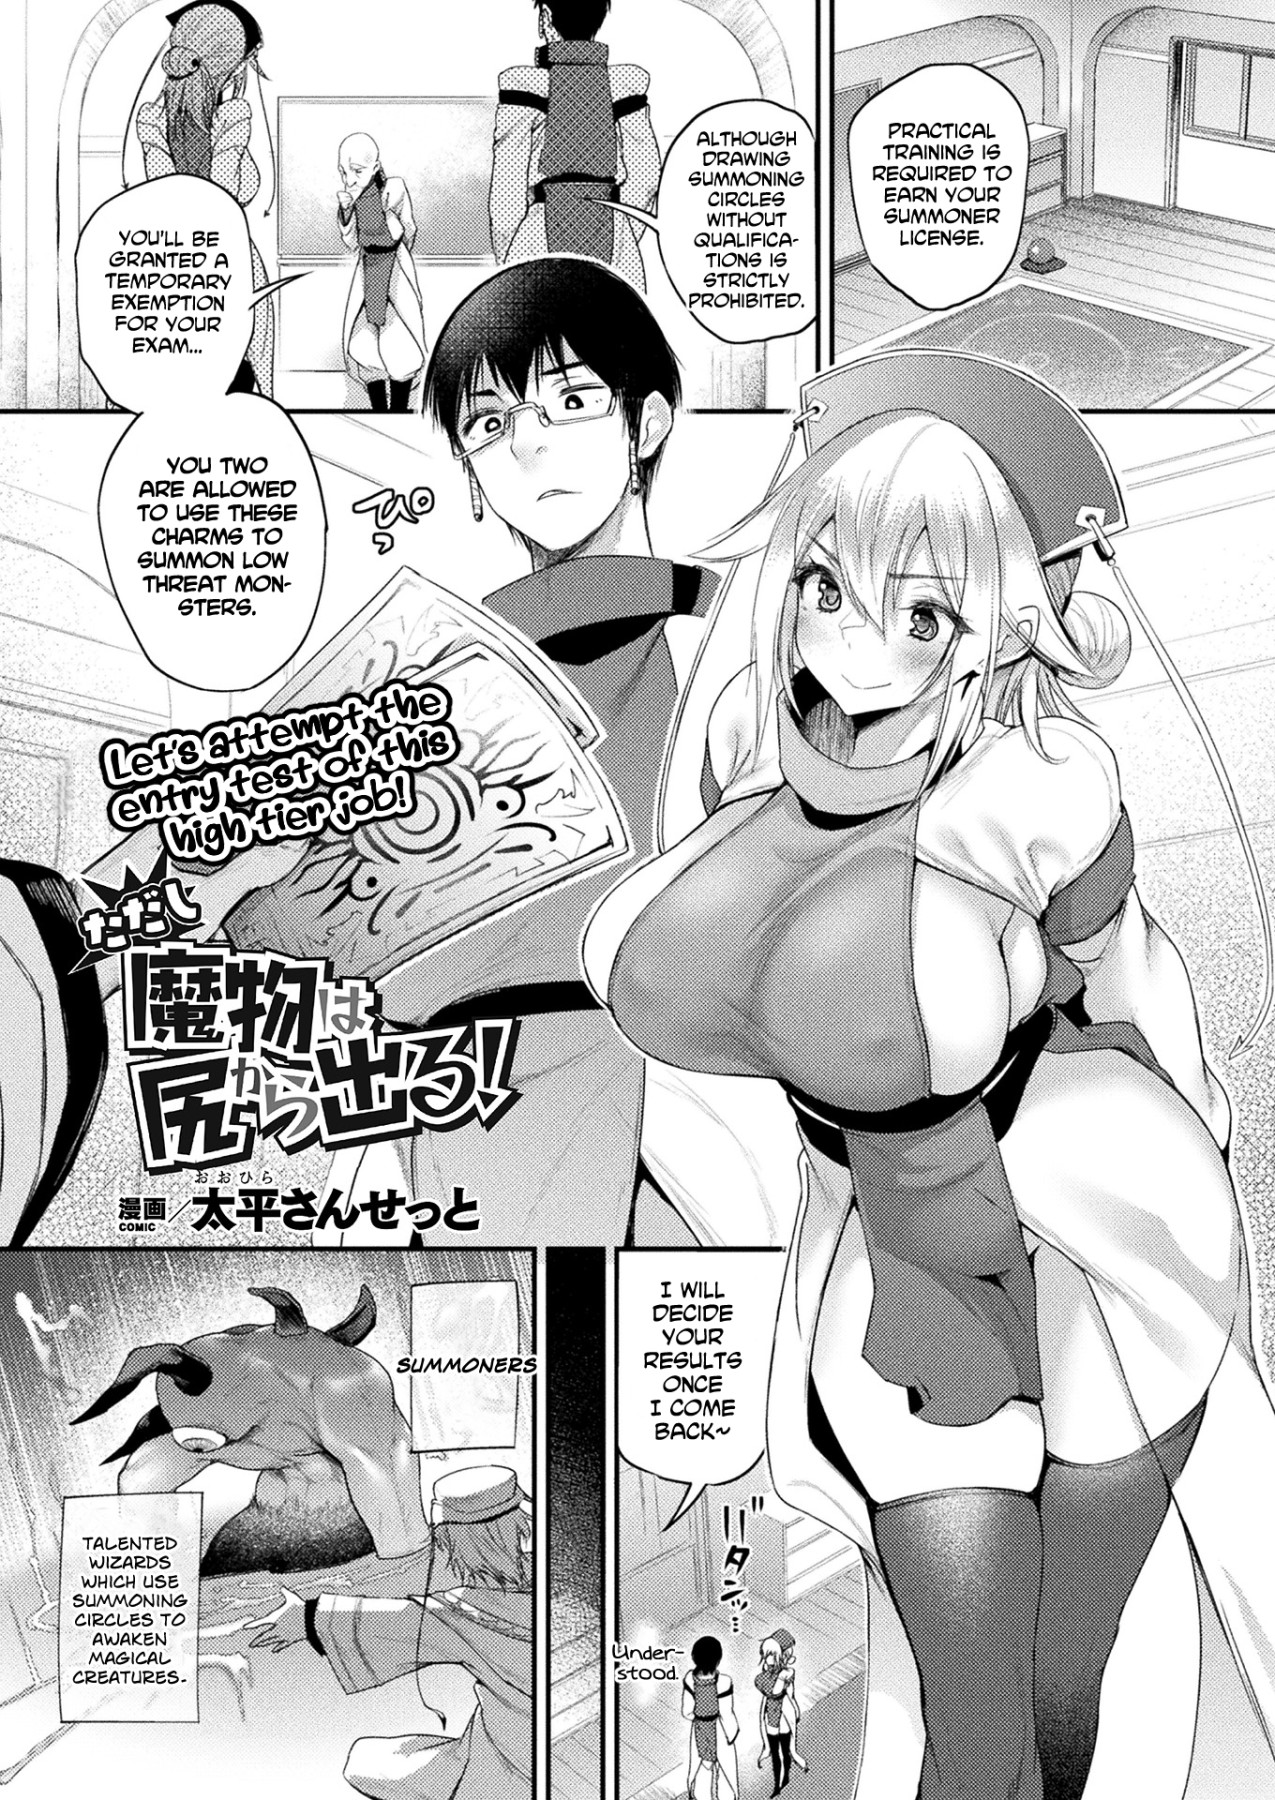 Hentai Manga Comic-Monsters Come From The Butt!-Read-1